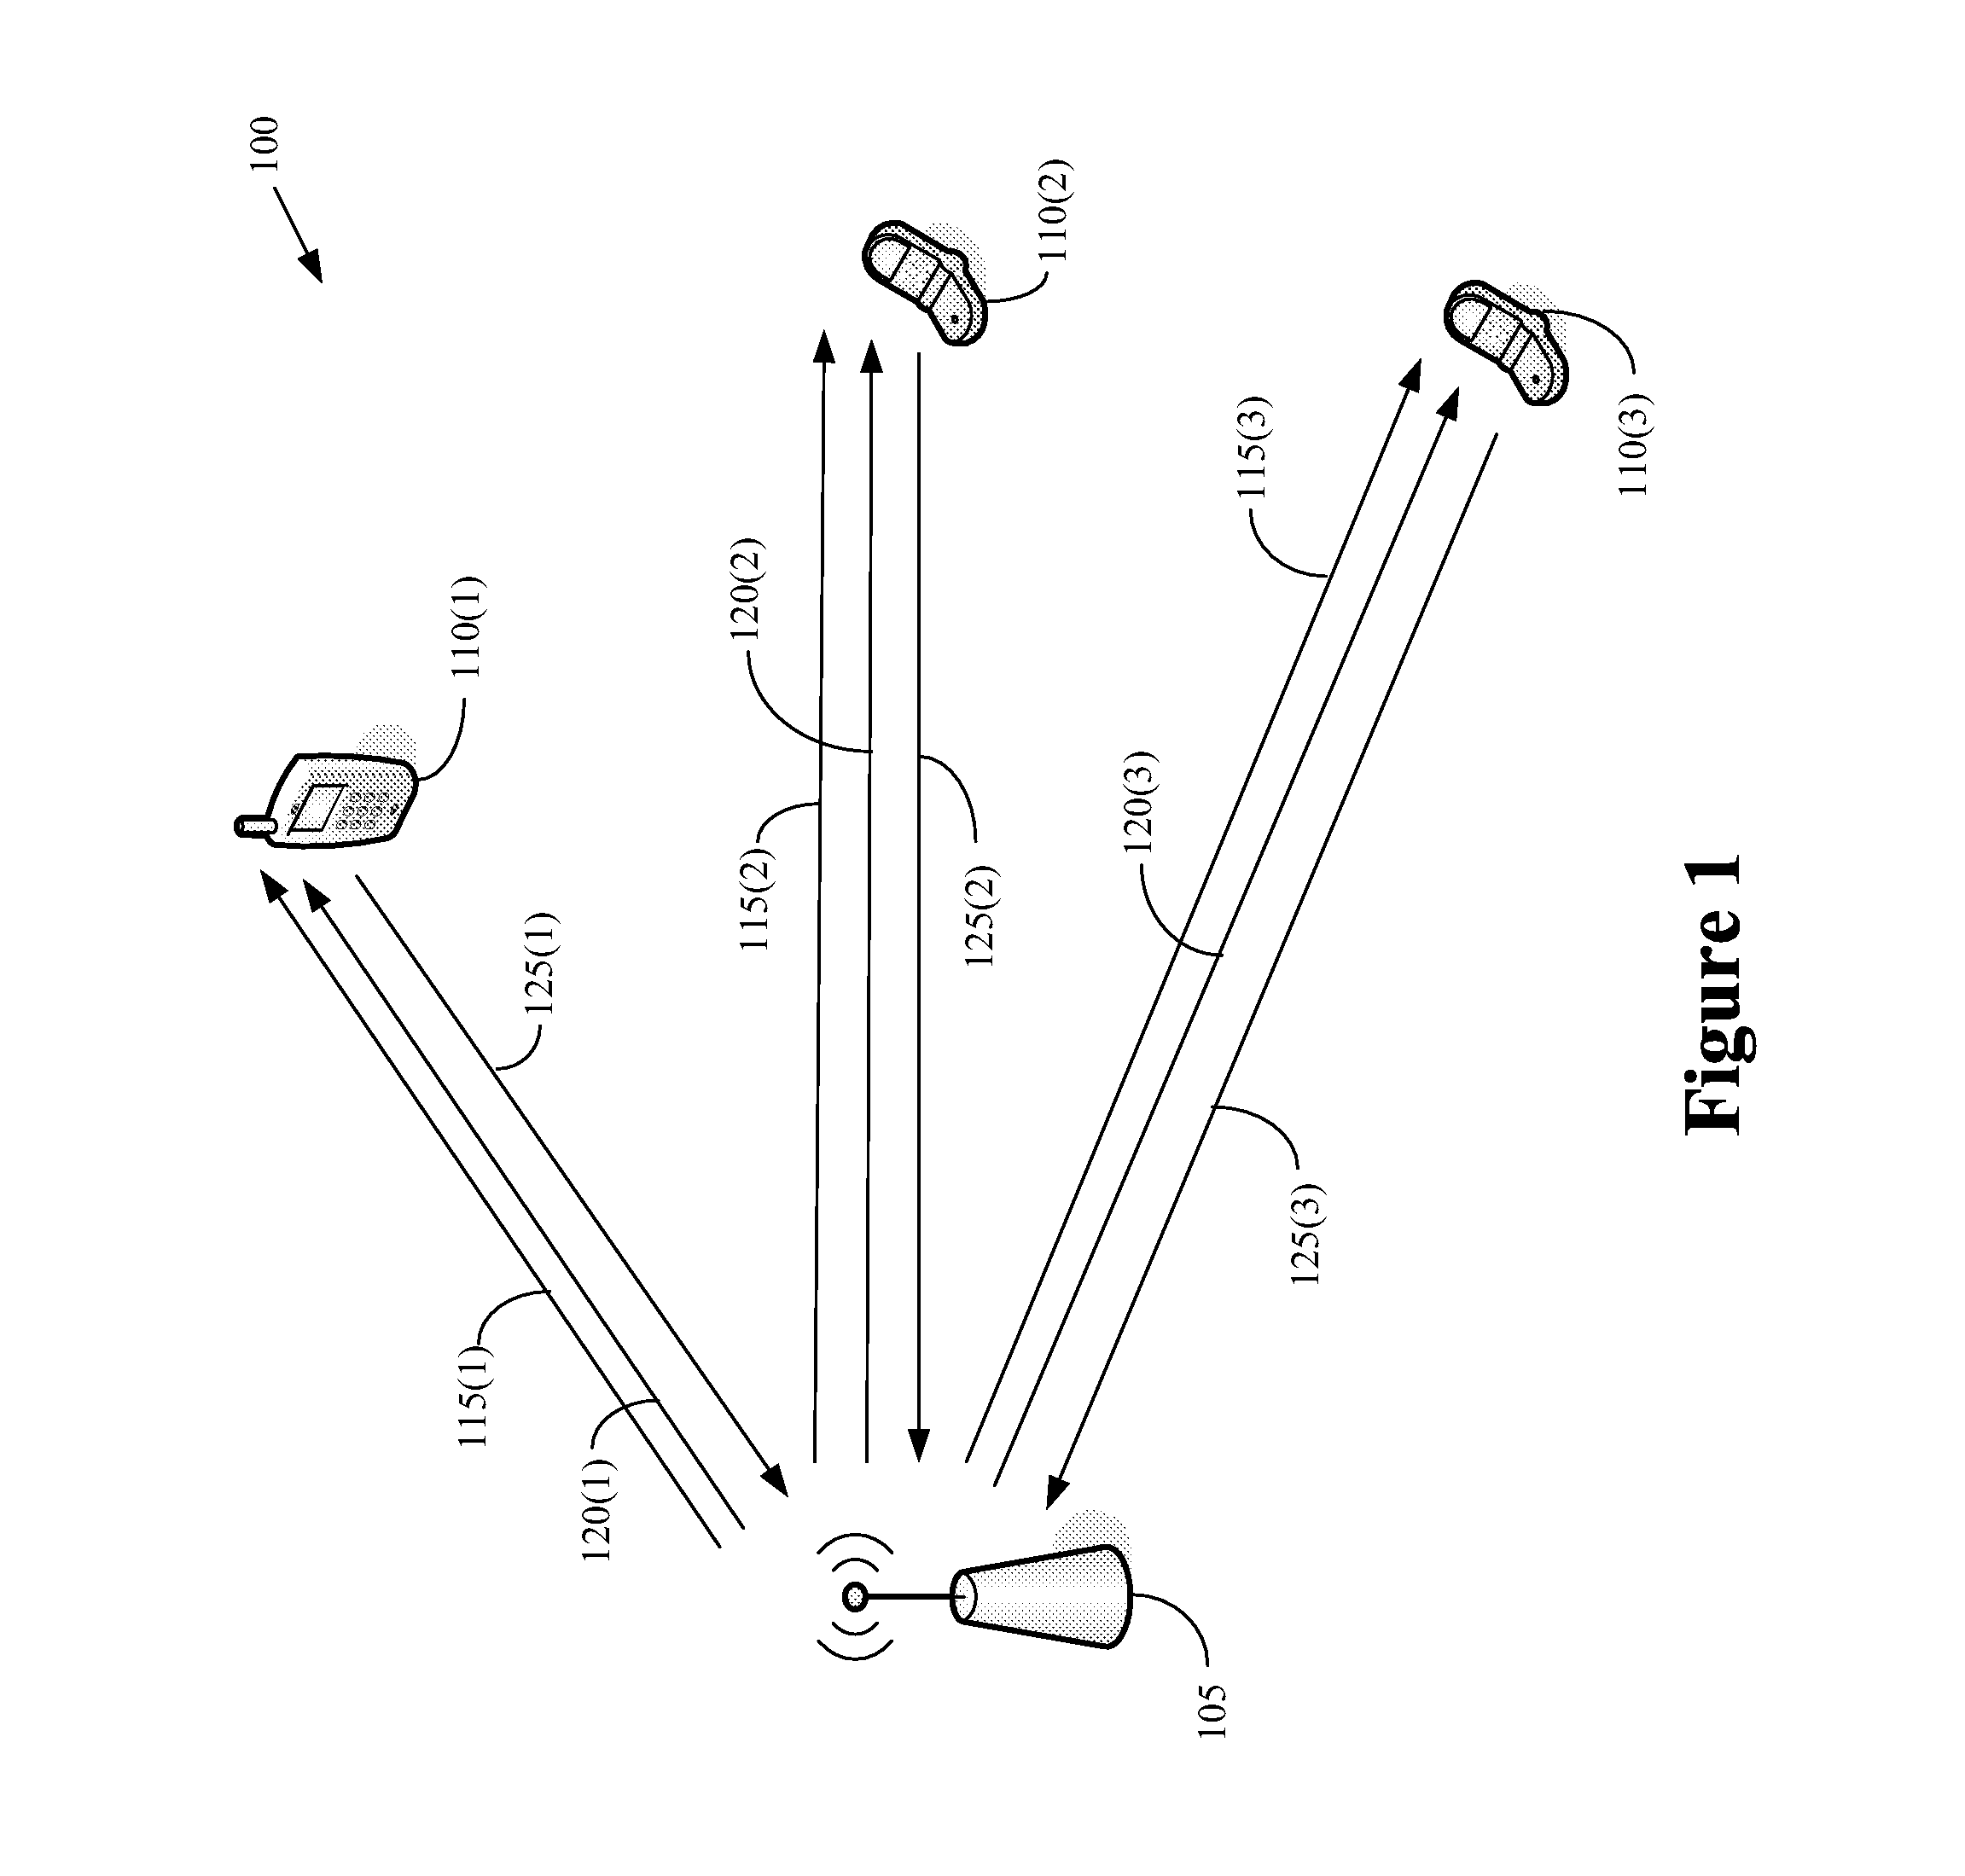 Method of assigning uplink acknowledgement channels in scheduled packet data systems